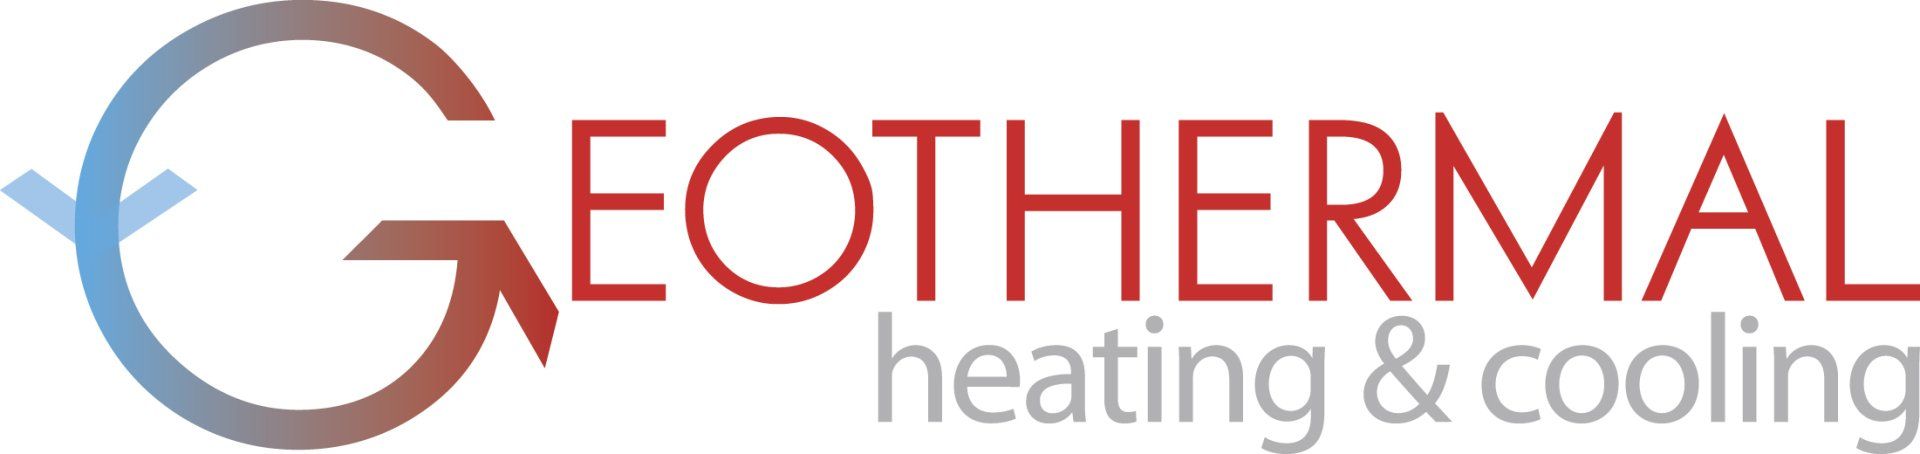 Geothermal Heating and Cooling — Spencerville, OH — Matt’s Heating & Cooling LLC